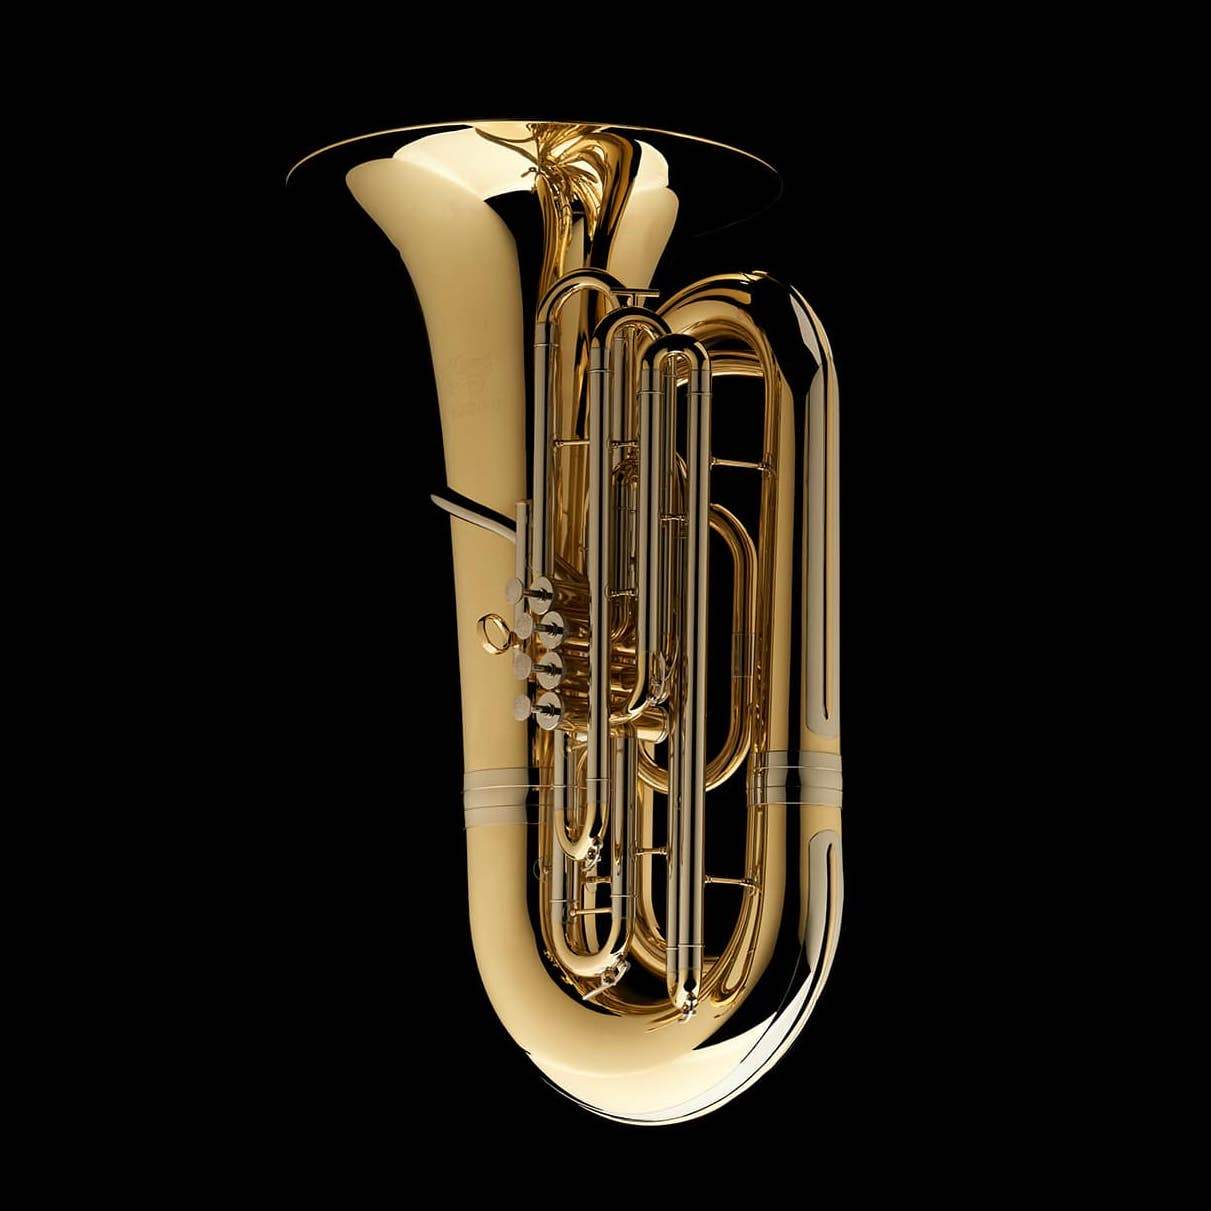 An image showing the side of a BBb 4/4 Tuba with 4-valves 'Dragon' from Wessex Tubas